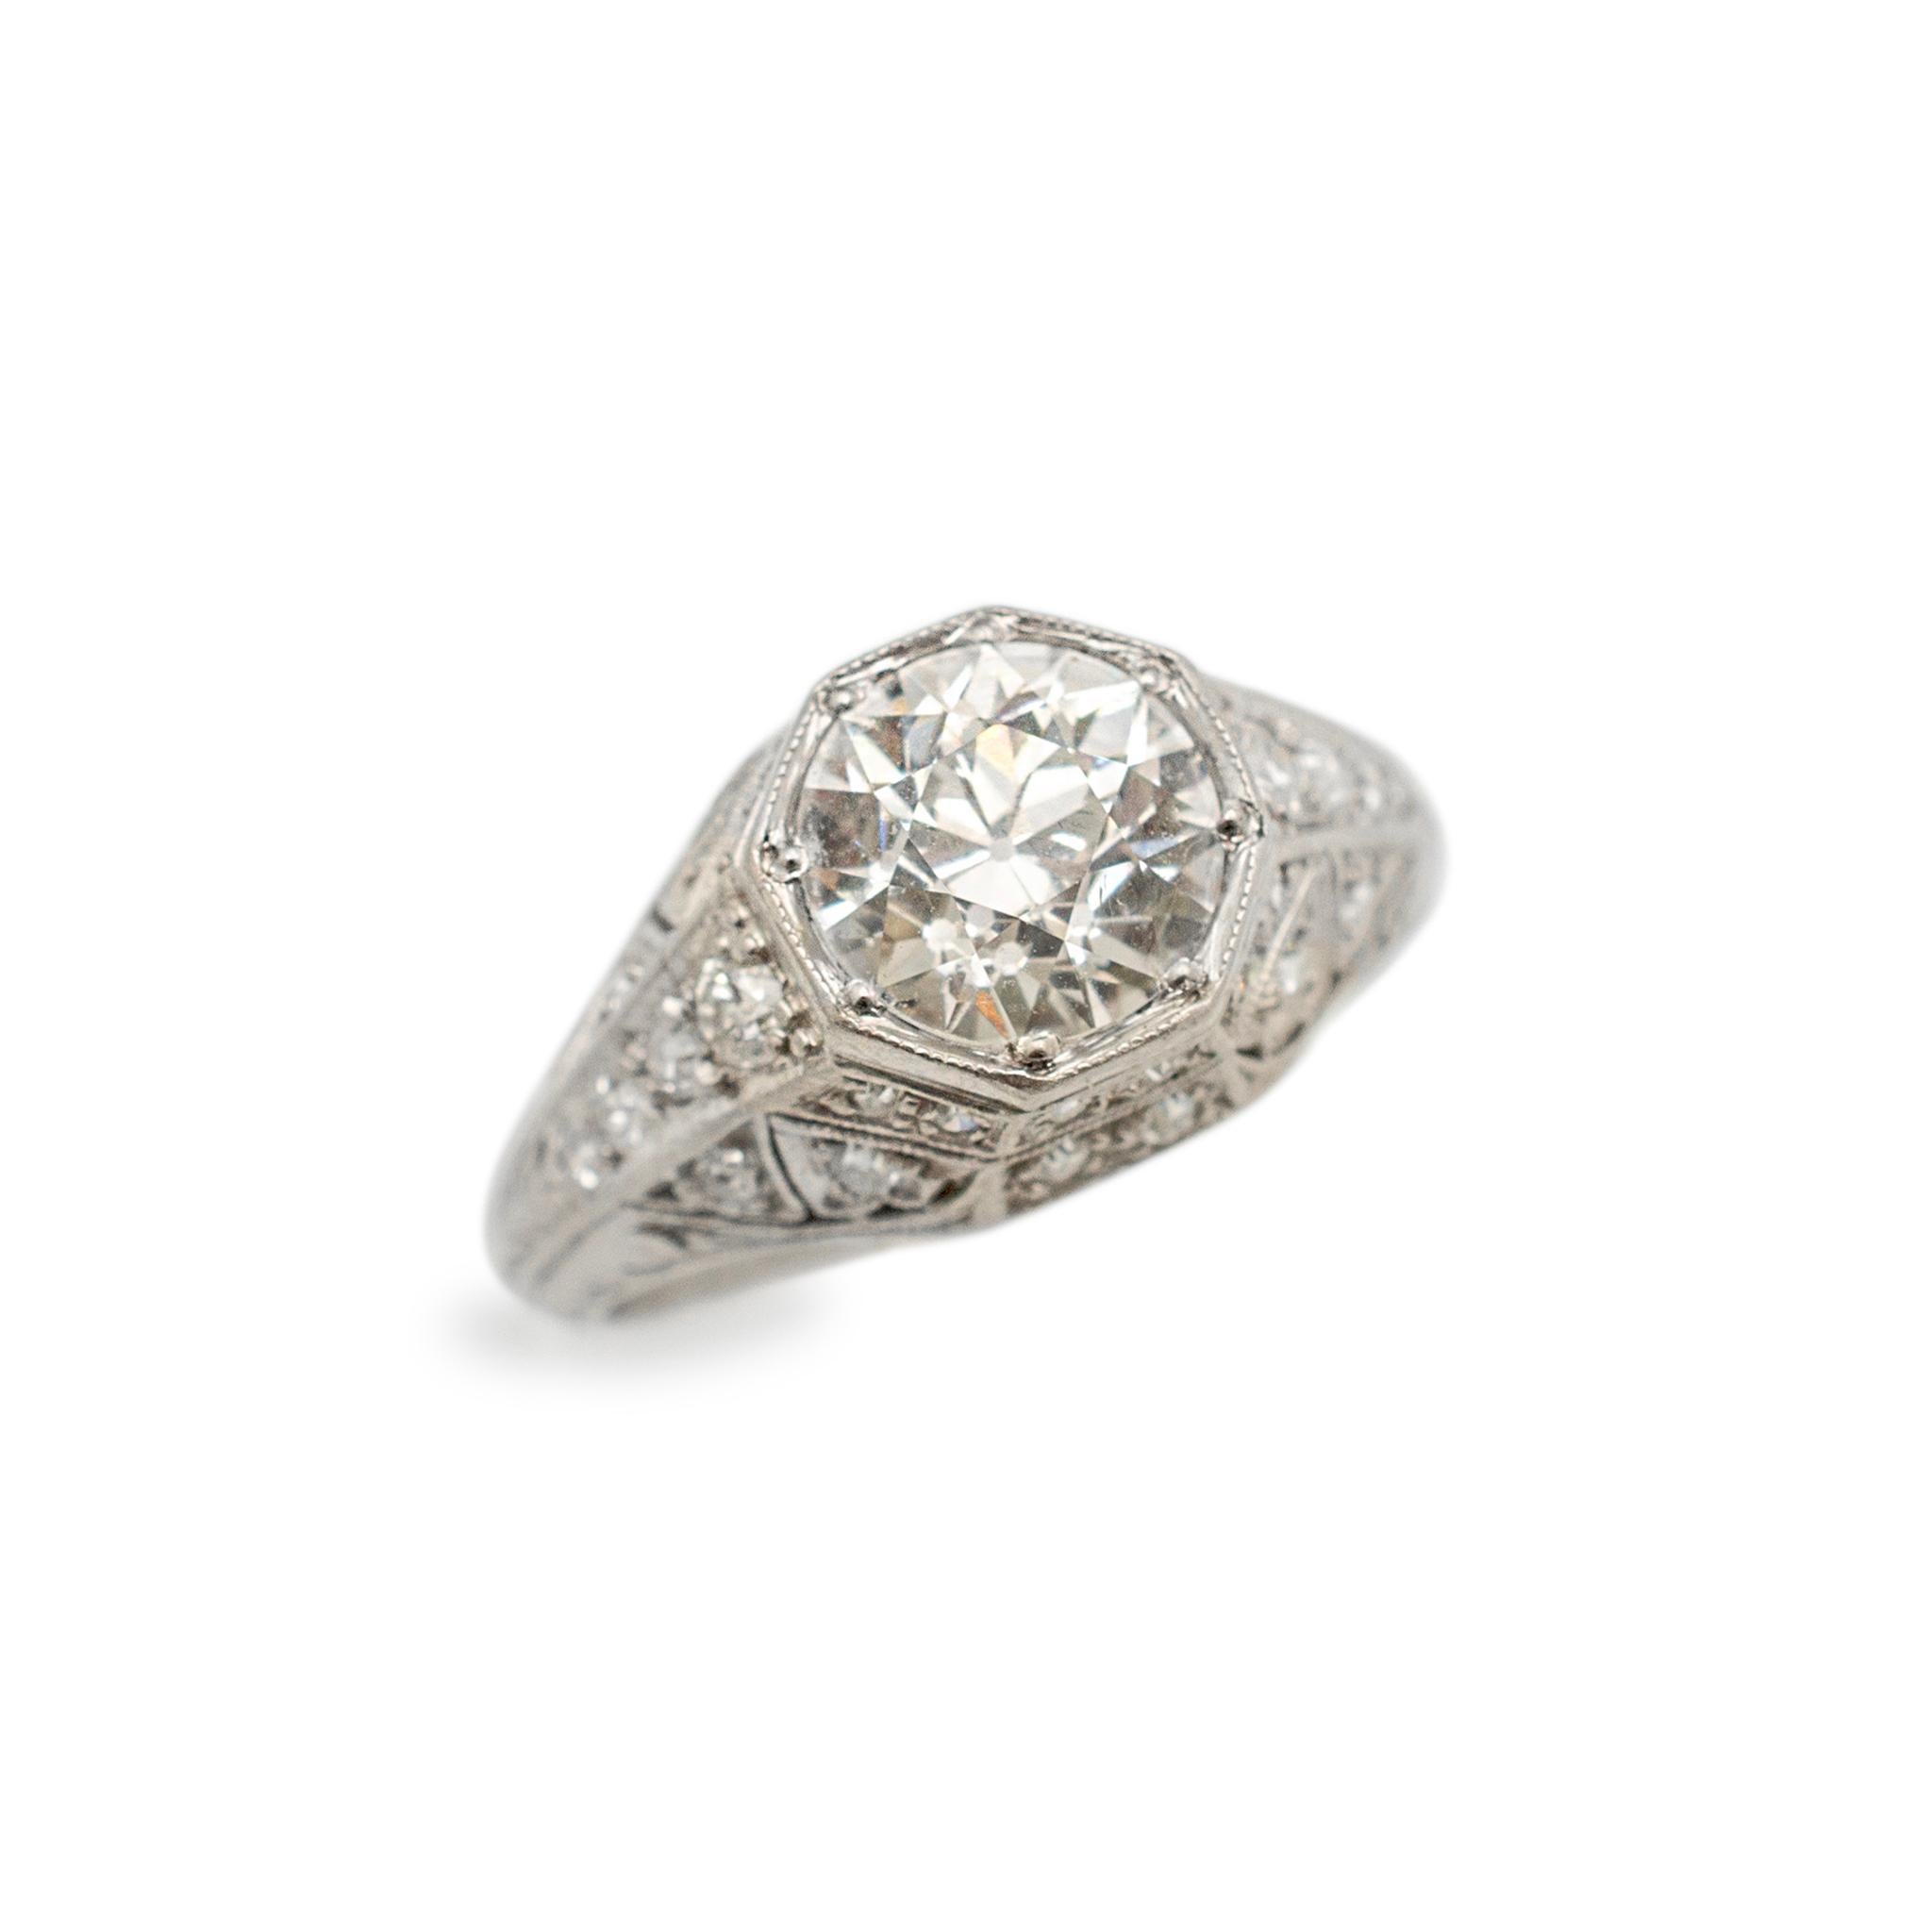 Gender: Ladies

Metal Type: Platinum

Size: 6

Shank Maximum Width: 10.20 mm tapering to 1.65 mm

Weight: 5.13 grams

Ladies filigreed 900 platinum diamond engagement antique art-deco ring with a half round shank.

Pre-owned in excellent condition.